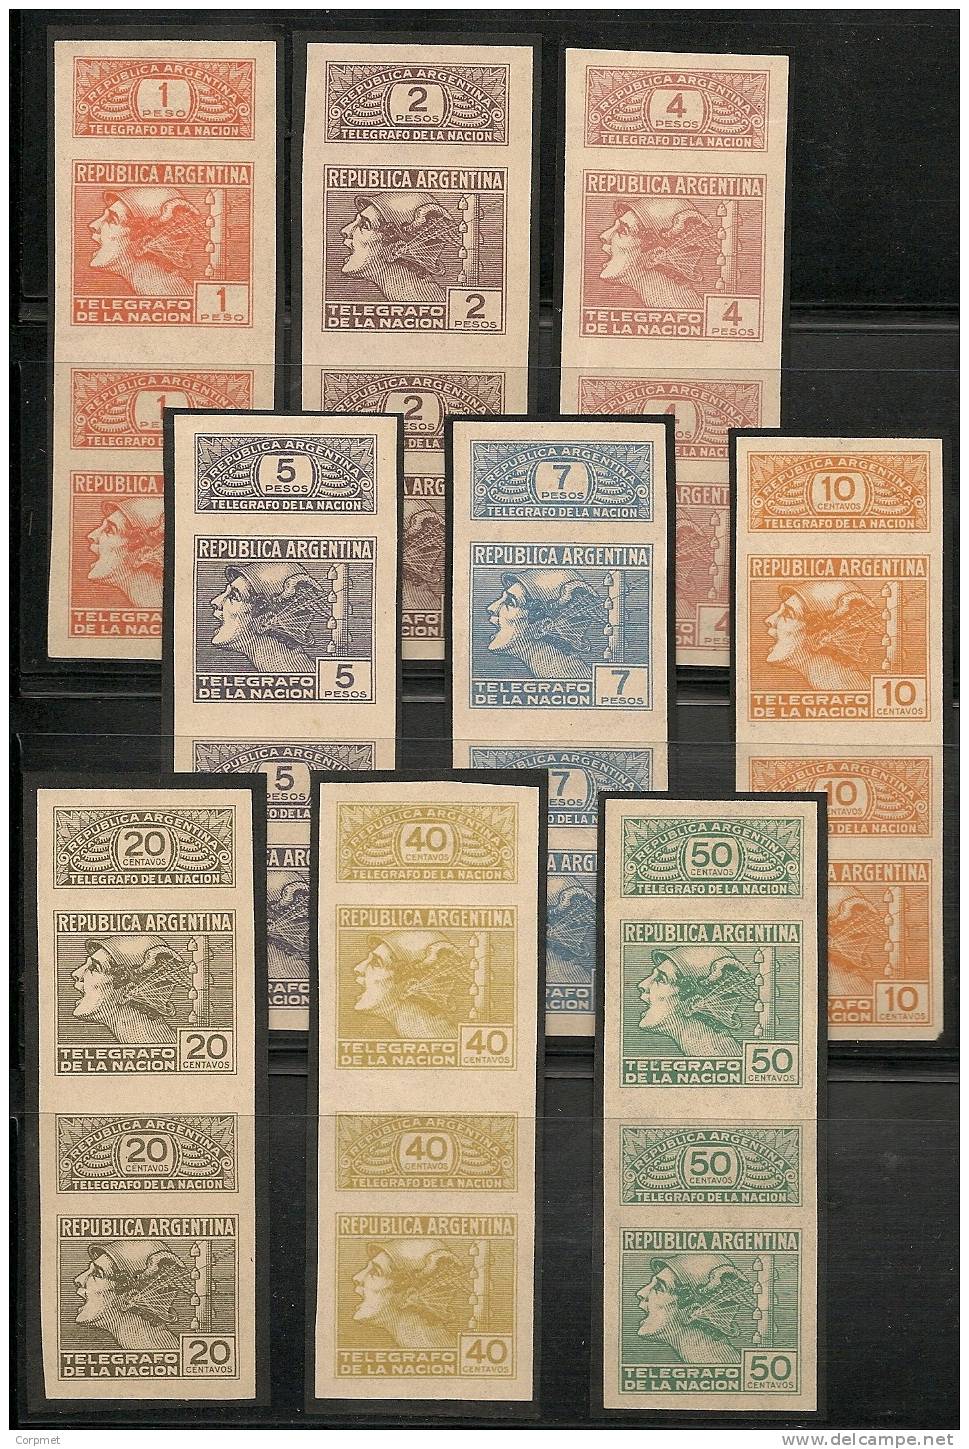 ARGENTINA - TELEGRAPH STAMPS - 1930 ESSAYS / PROOFS IMPERFORATE PAIRS In DIFF COLORS AND VALUES -Complete Set Of 9 - - Telégrafo